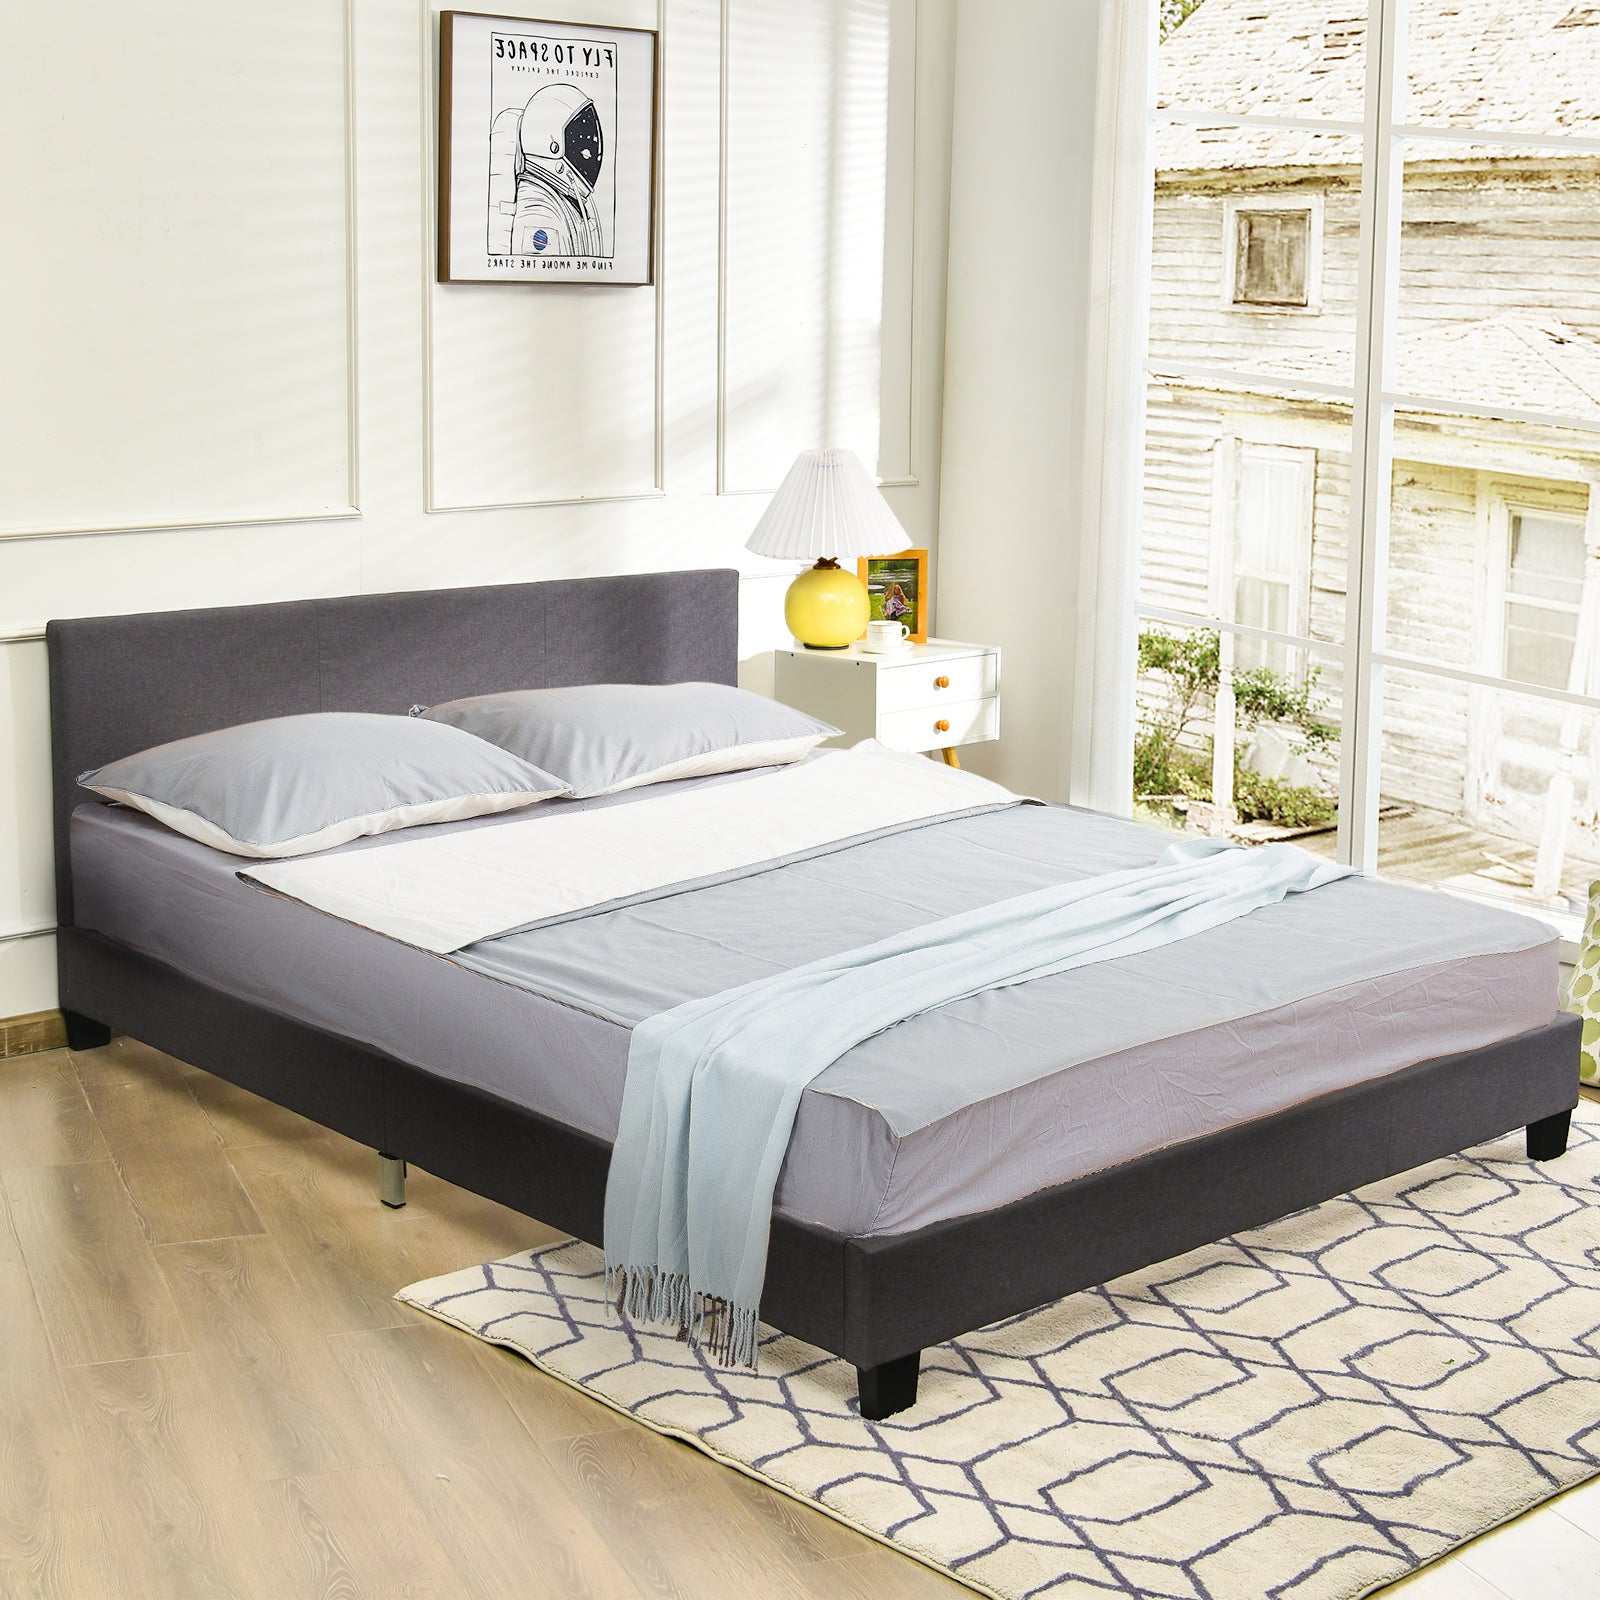 Faux Leather Upholstered Platform Bed W/Headboard | Queen Bed Frame